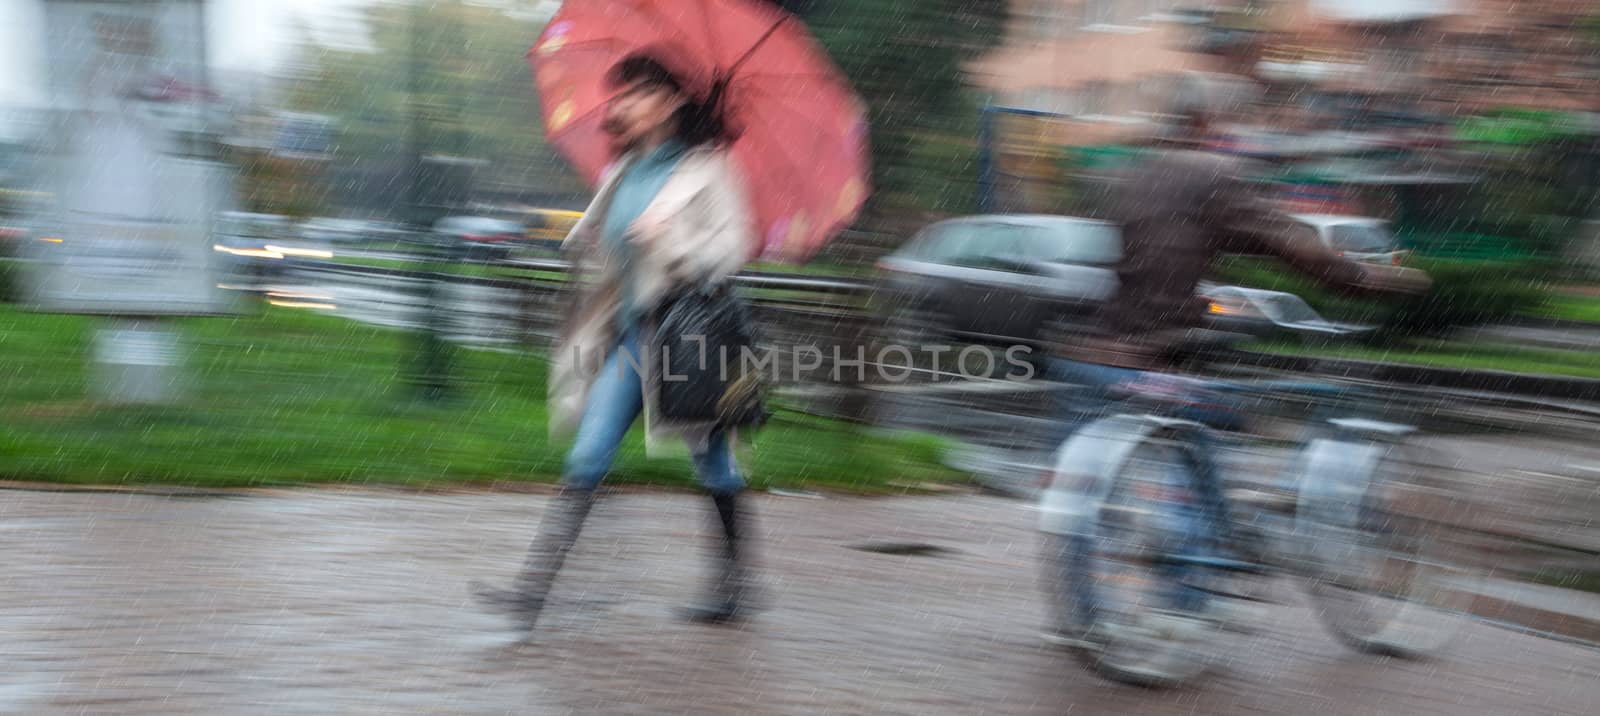 Rainy day in the city  in motion blur. People going about their business